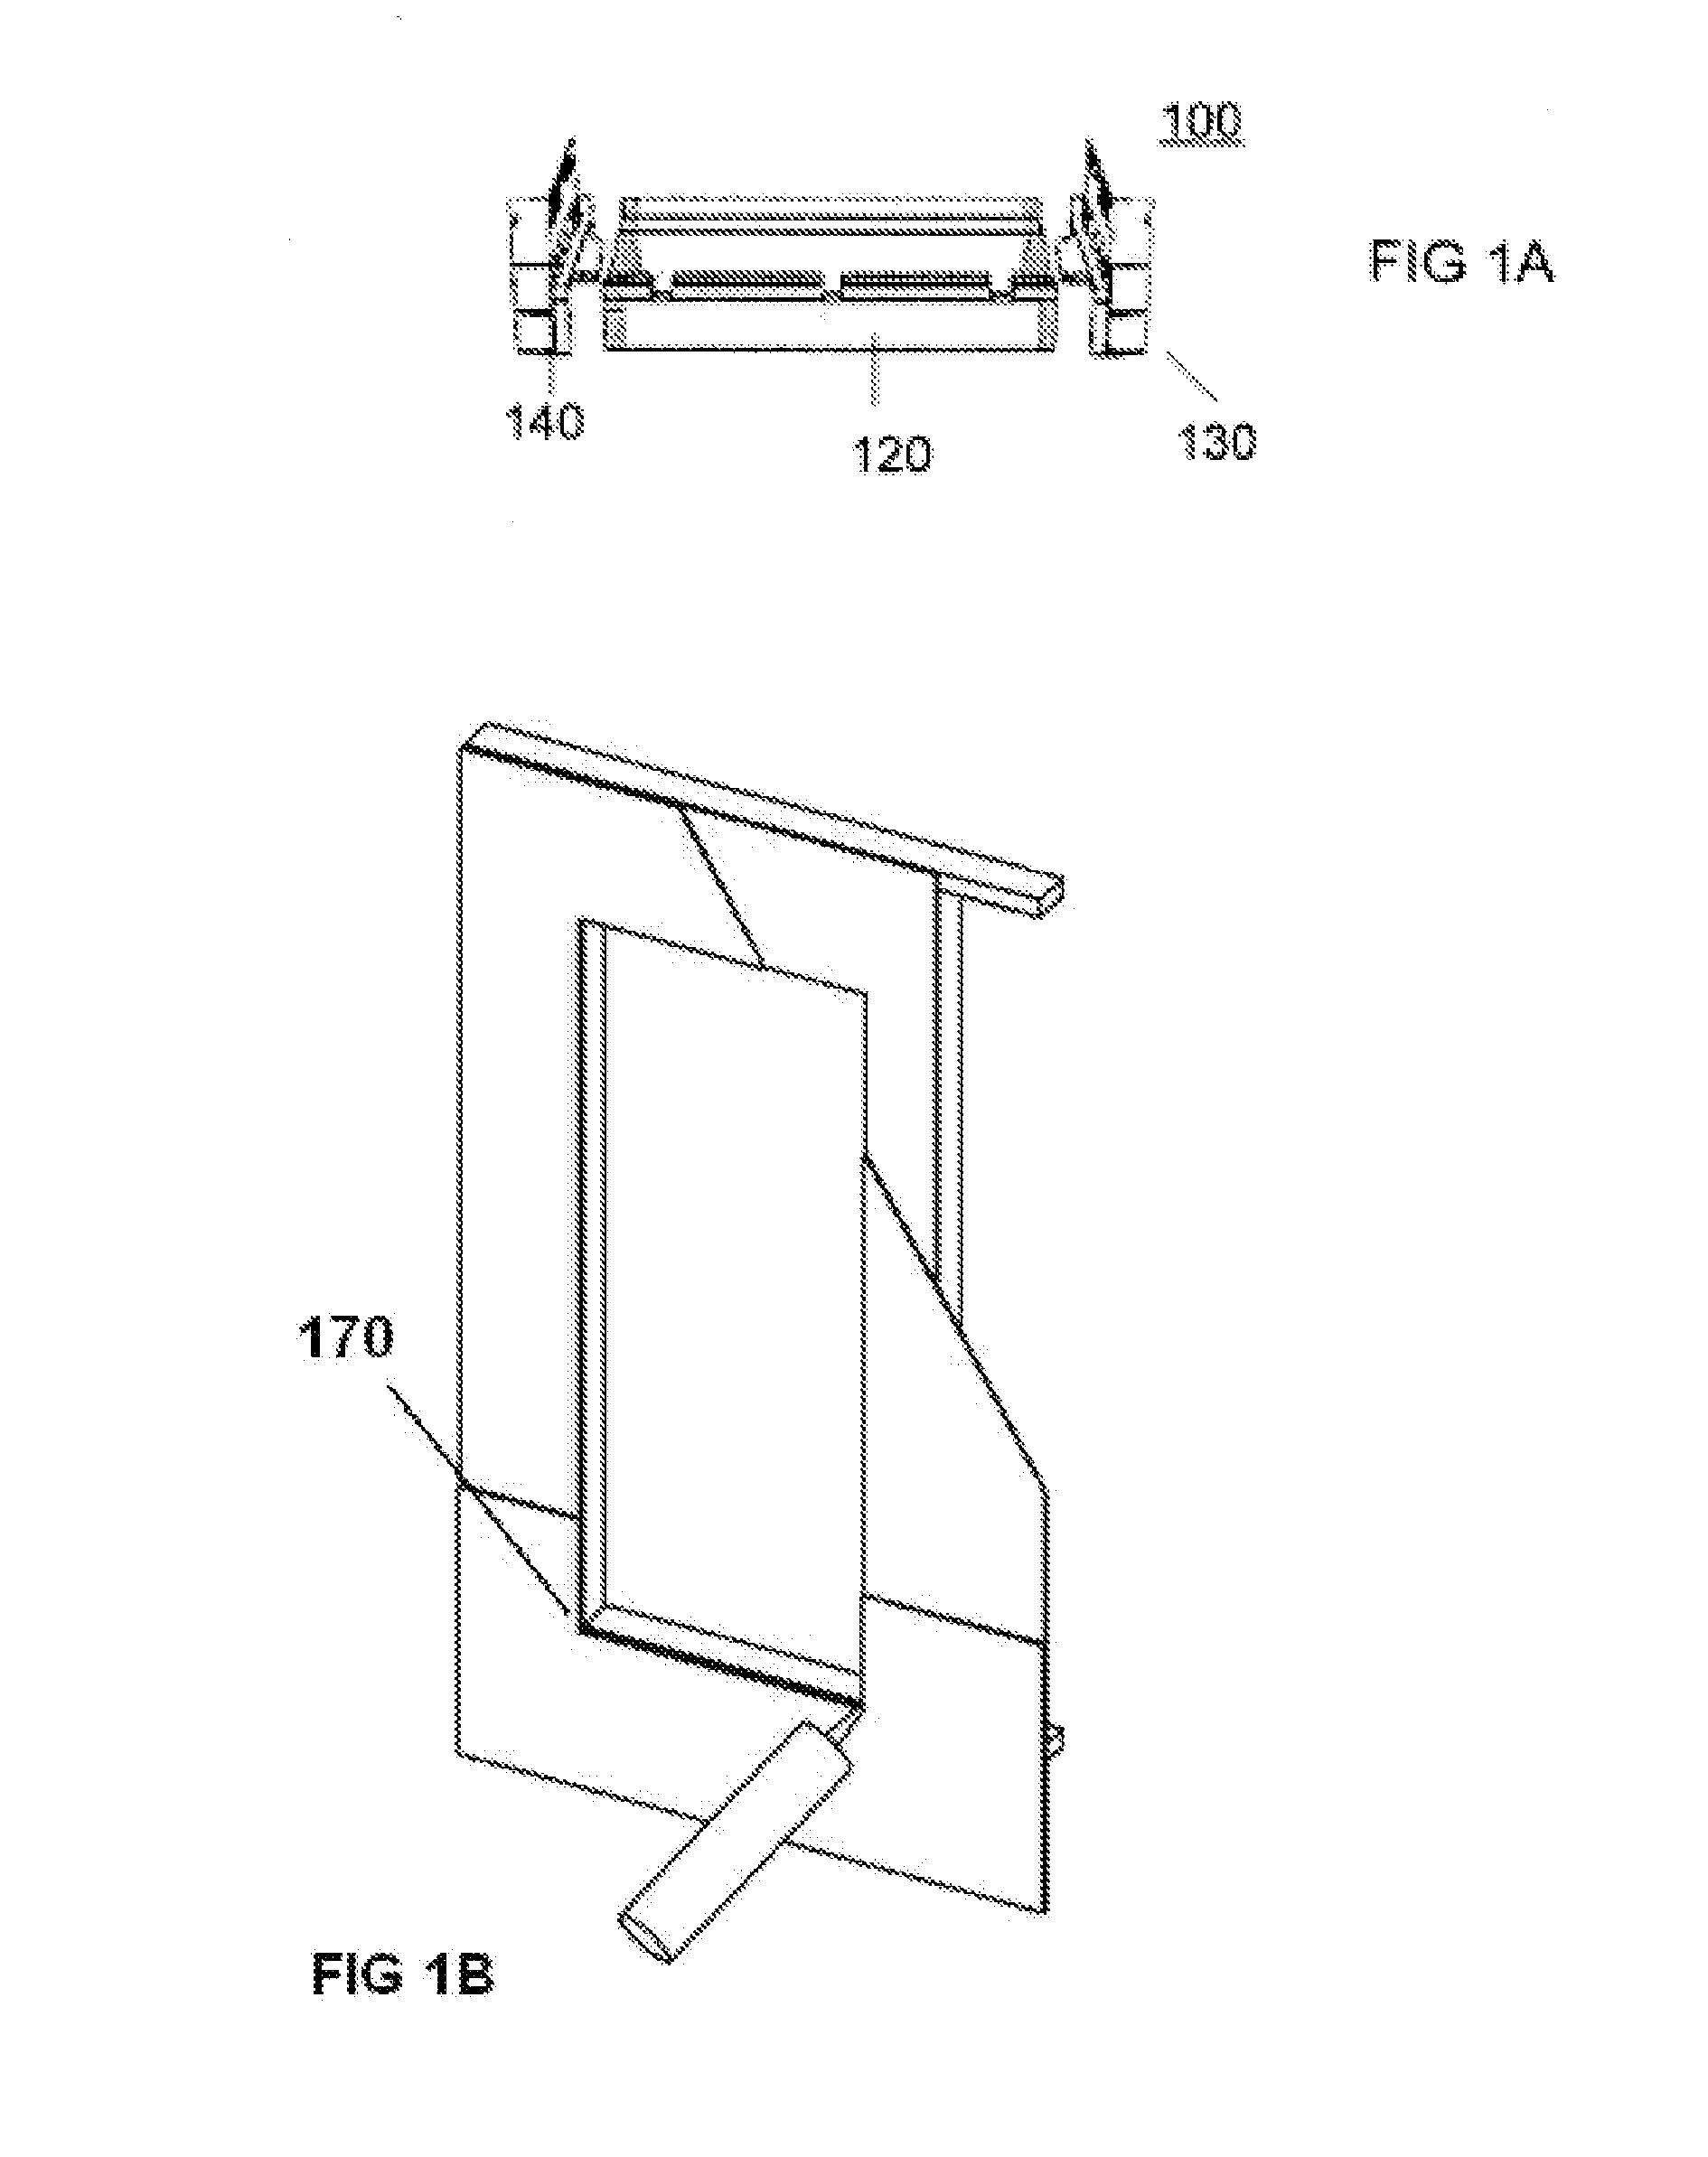 Apparatus and method for door and window head flashing